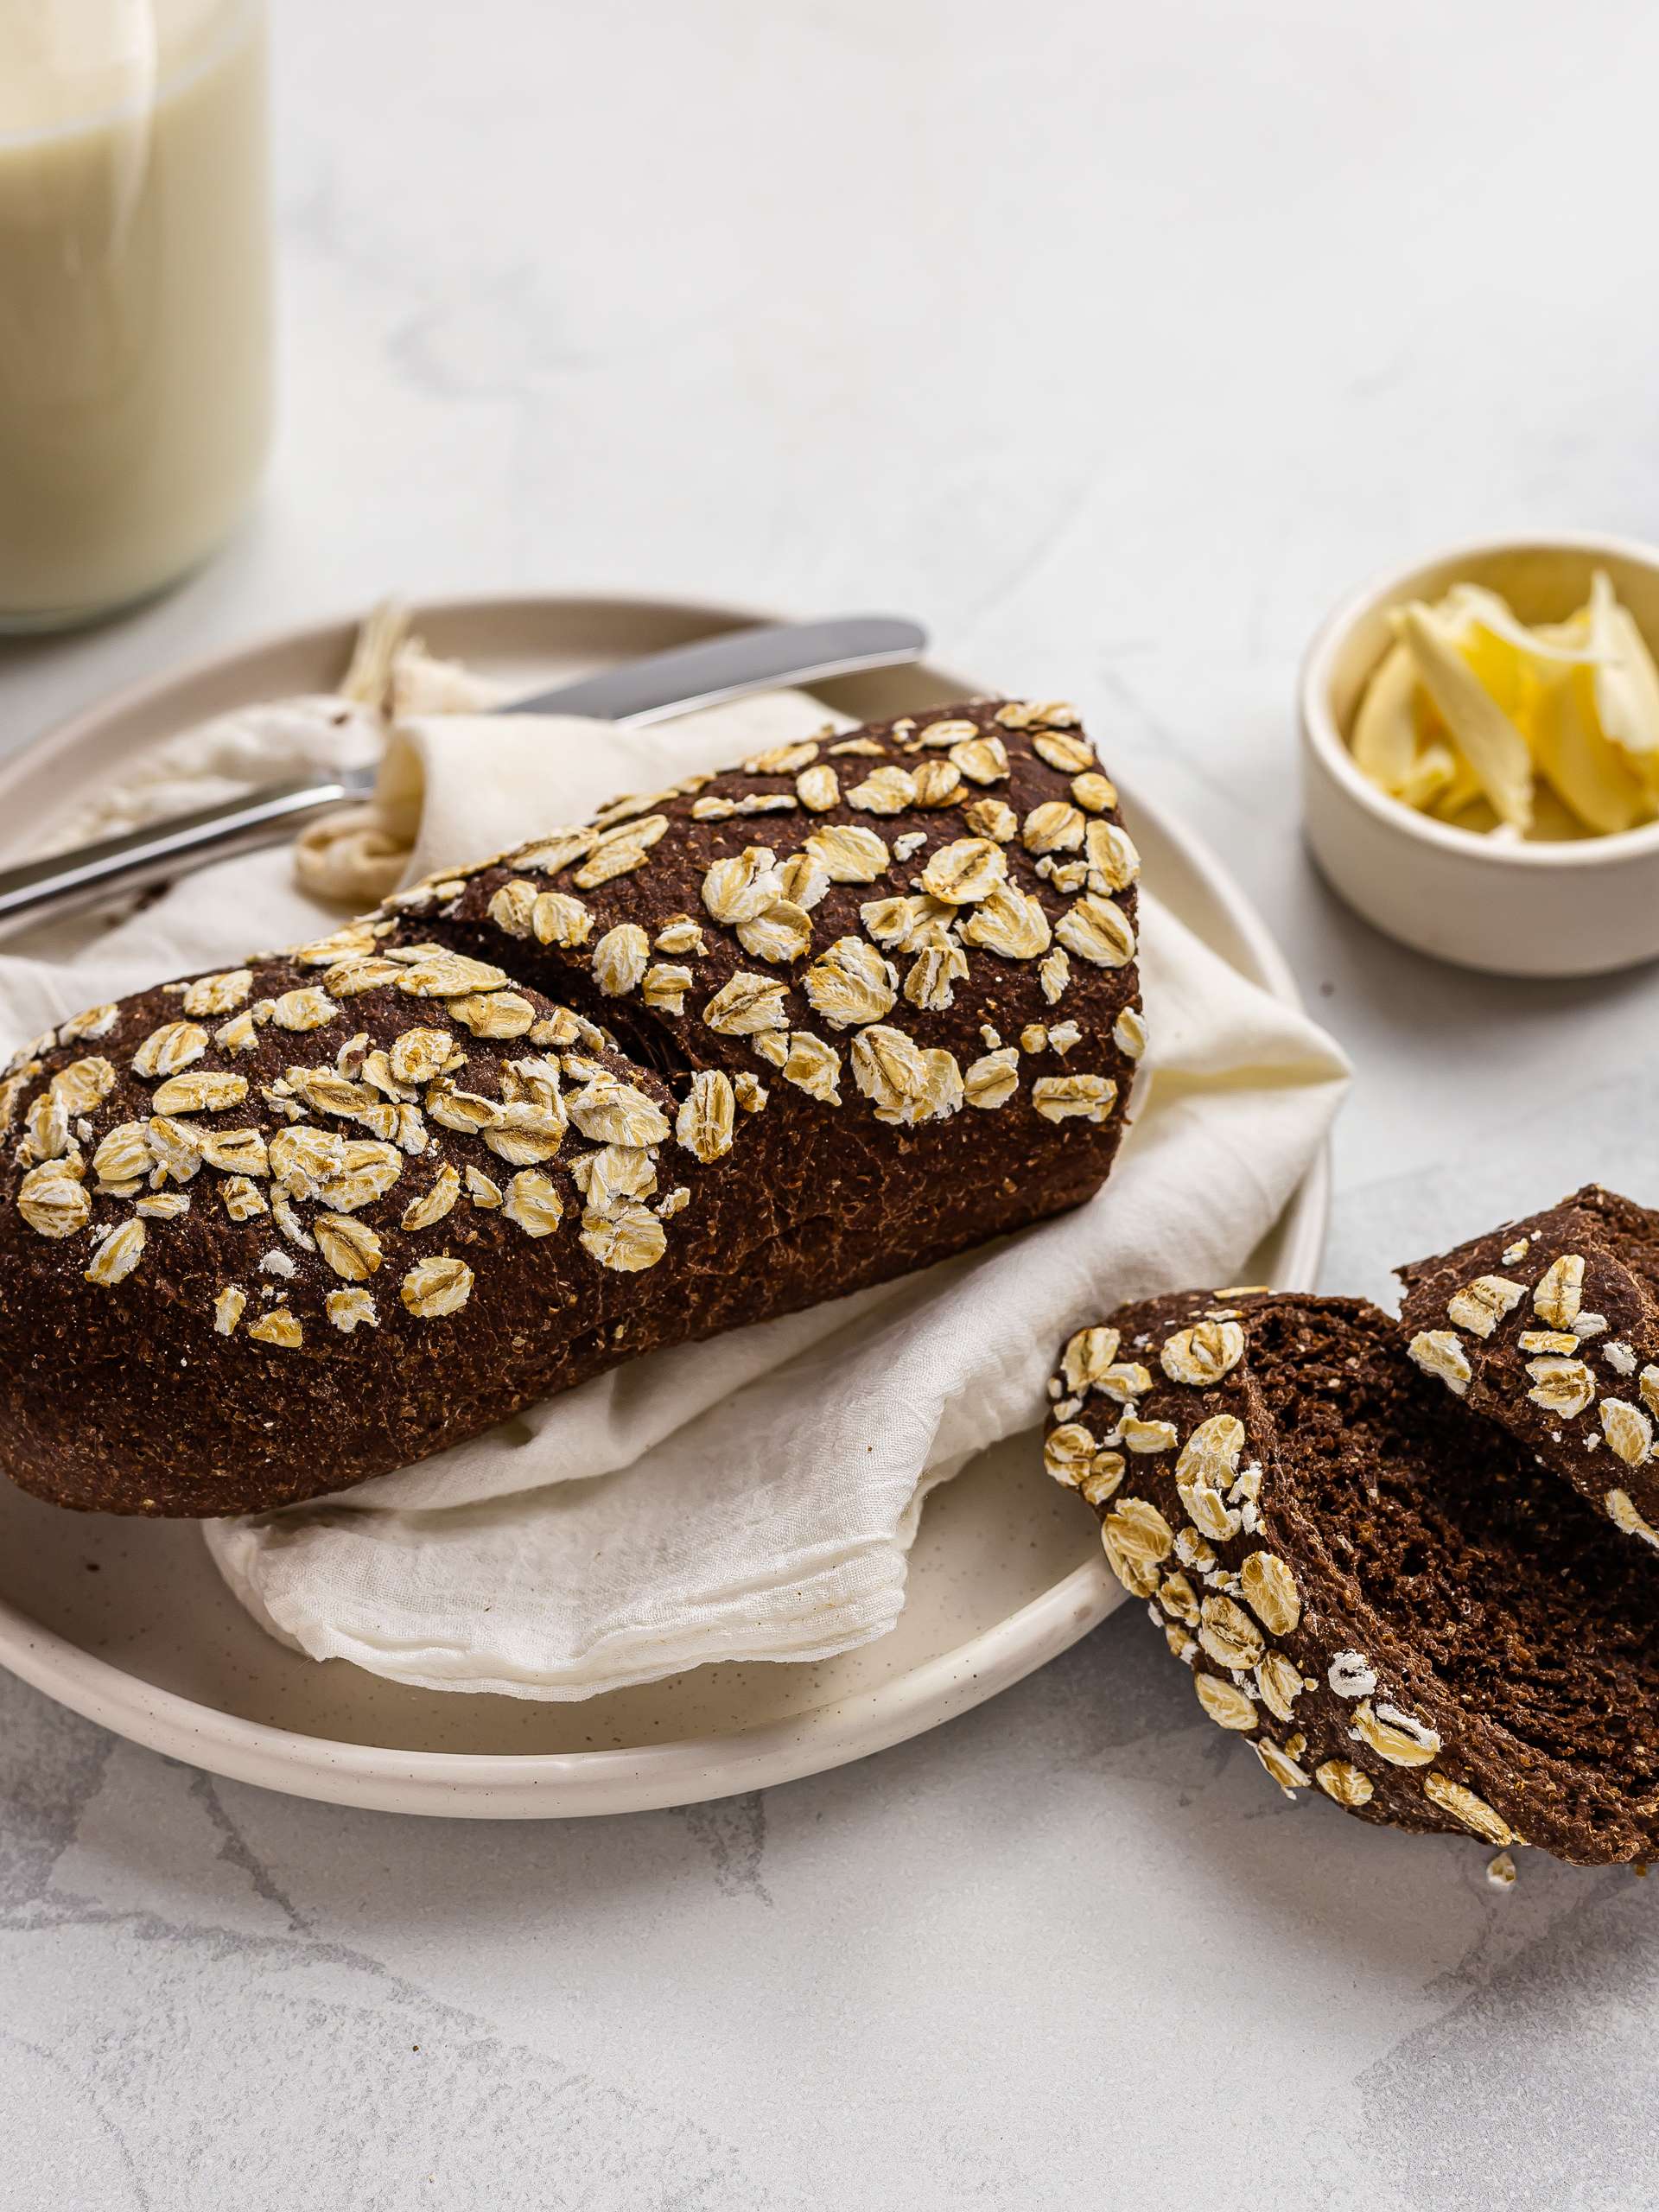 Cheesecake Factory Brown Bread